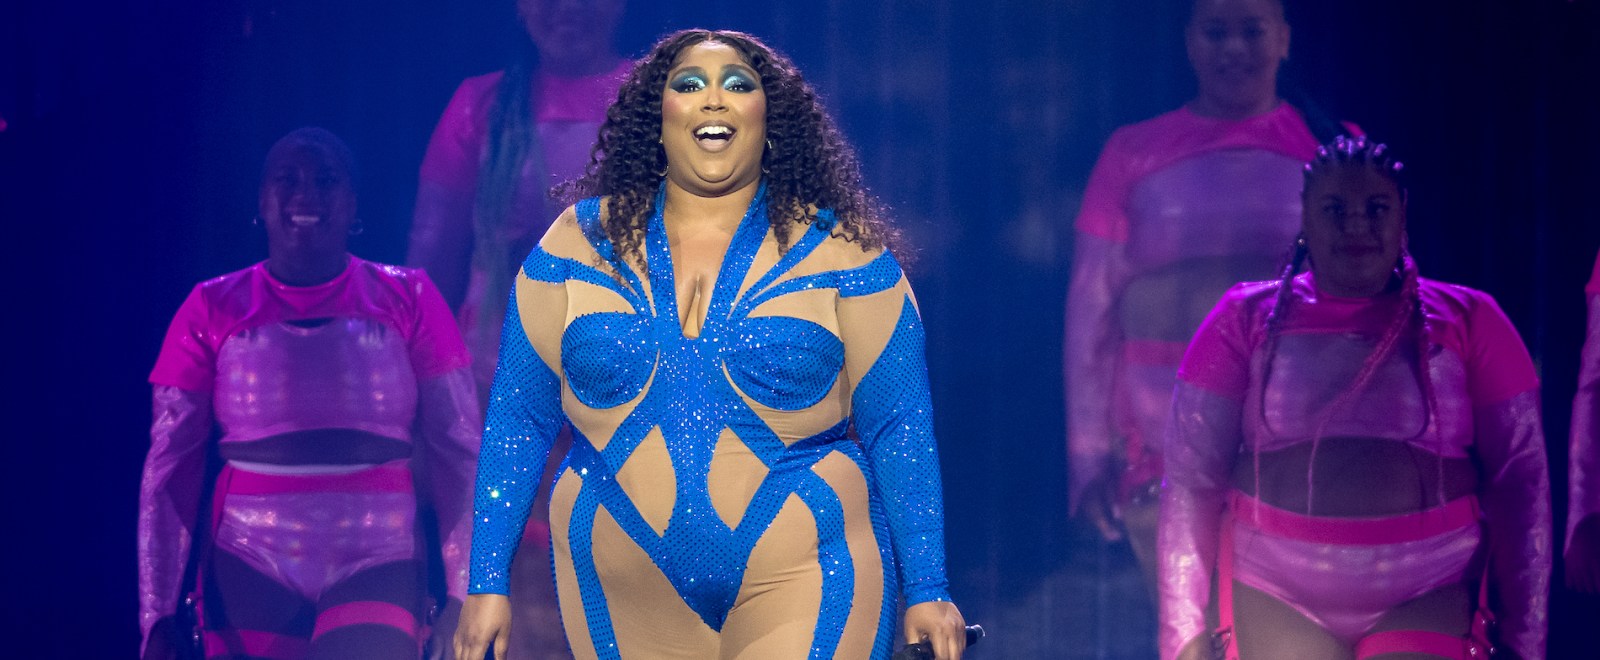 Lizzo Special Tour 2022